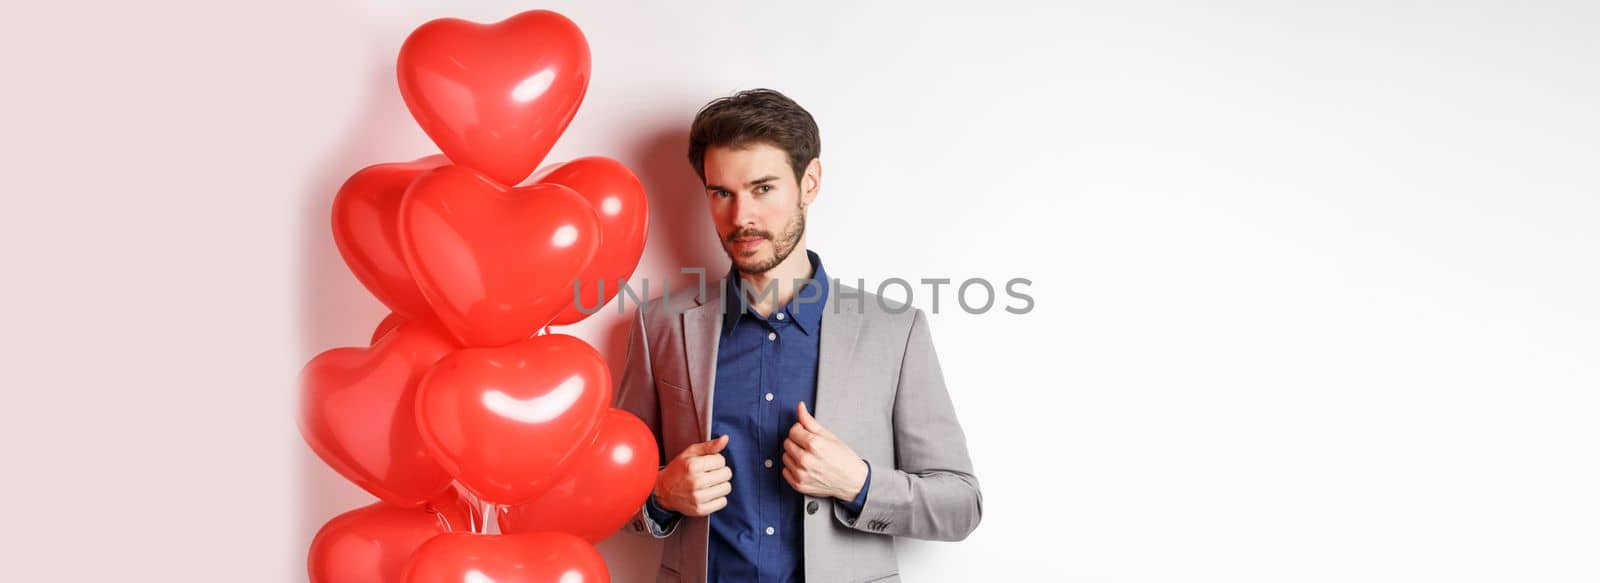 Lovers day. Handsome and confident young man getting dressed for Valentines day, fixing suit and looking at camera, standing near romantic heart balloons, white background.